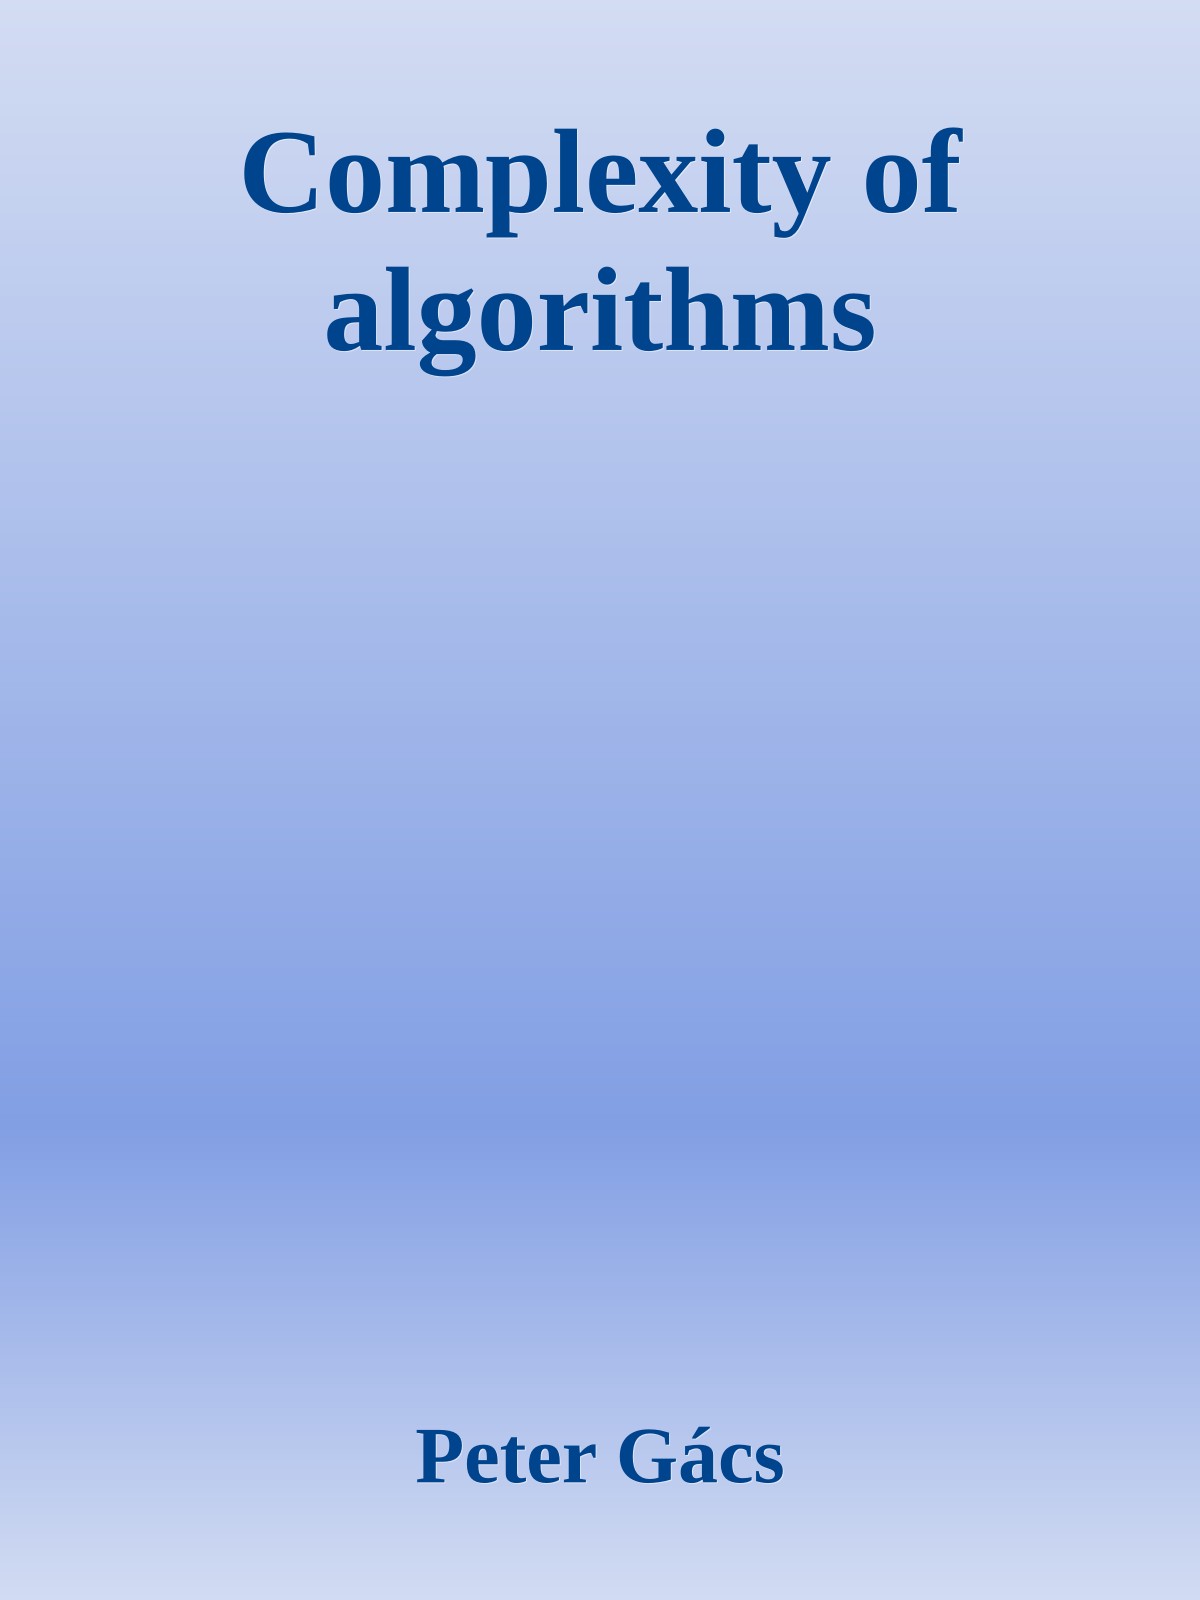 Complexity of algorithms